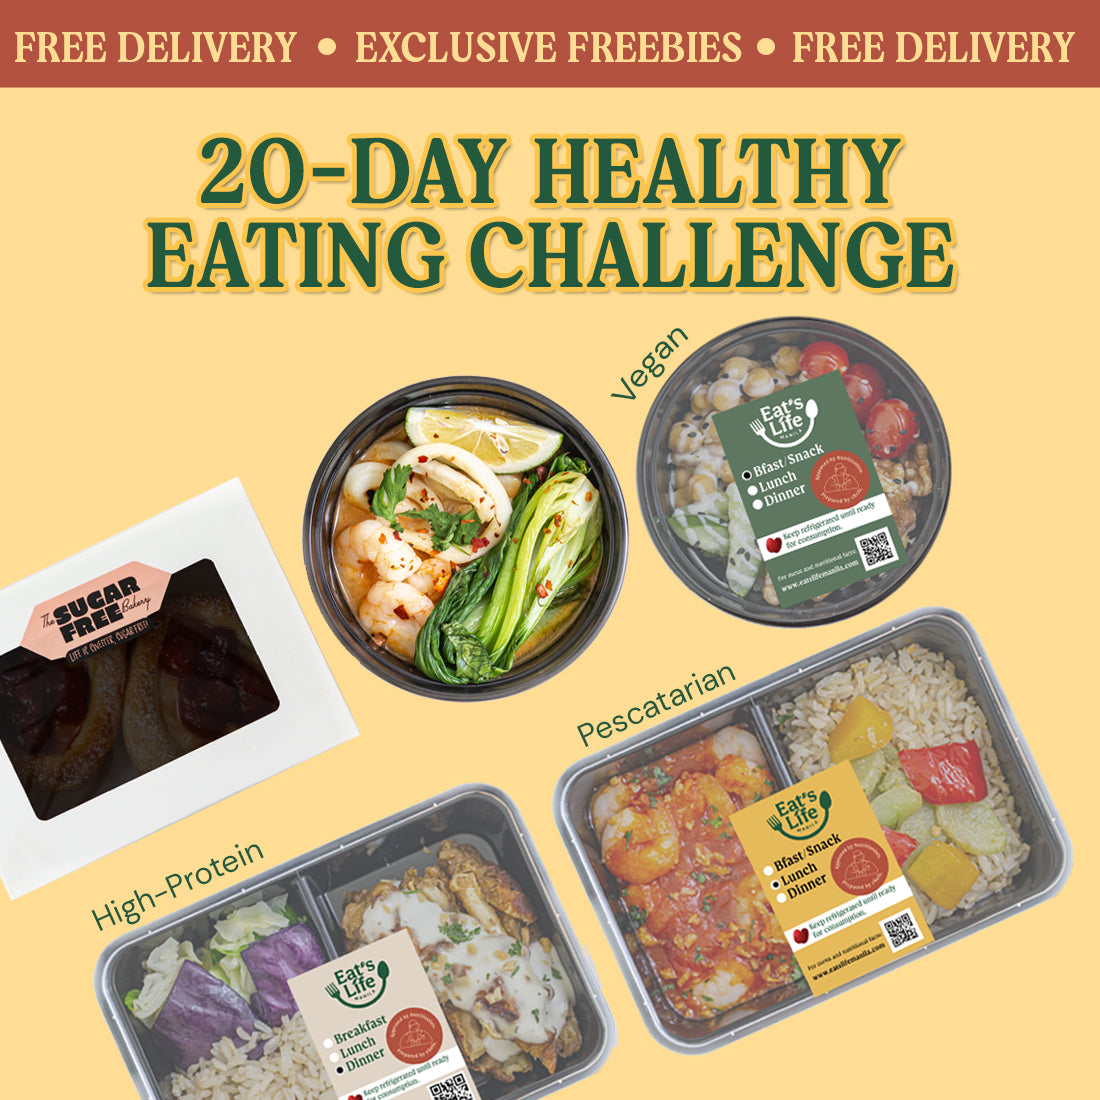 20-Day Healthy Eating Challenge